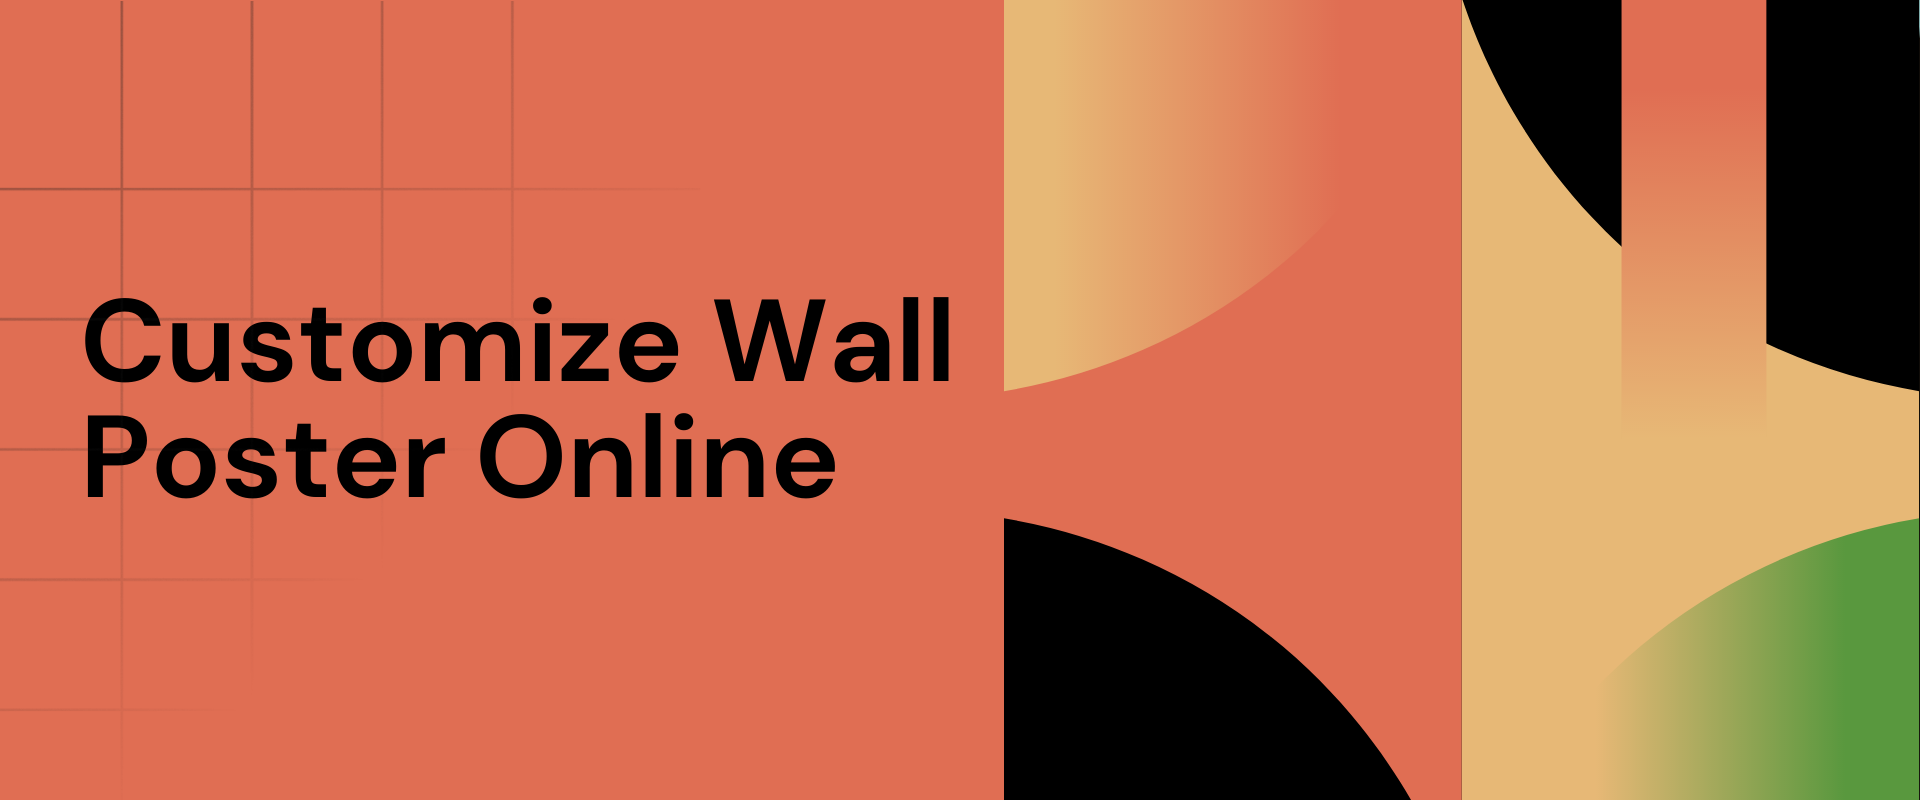 6 Easy Steps to Customize Your Own Wall Poster Online in India